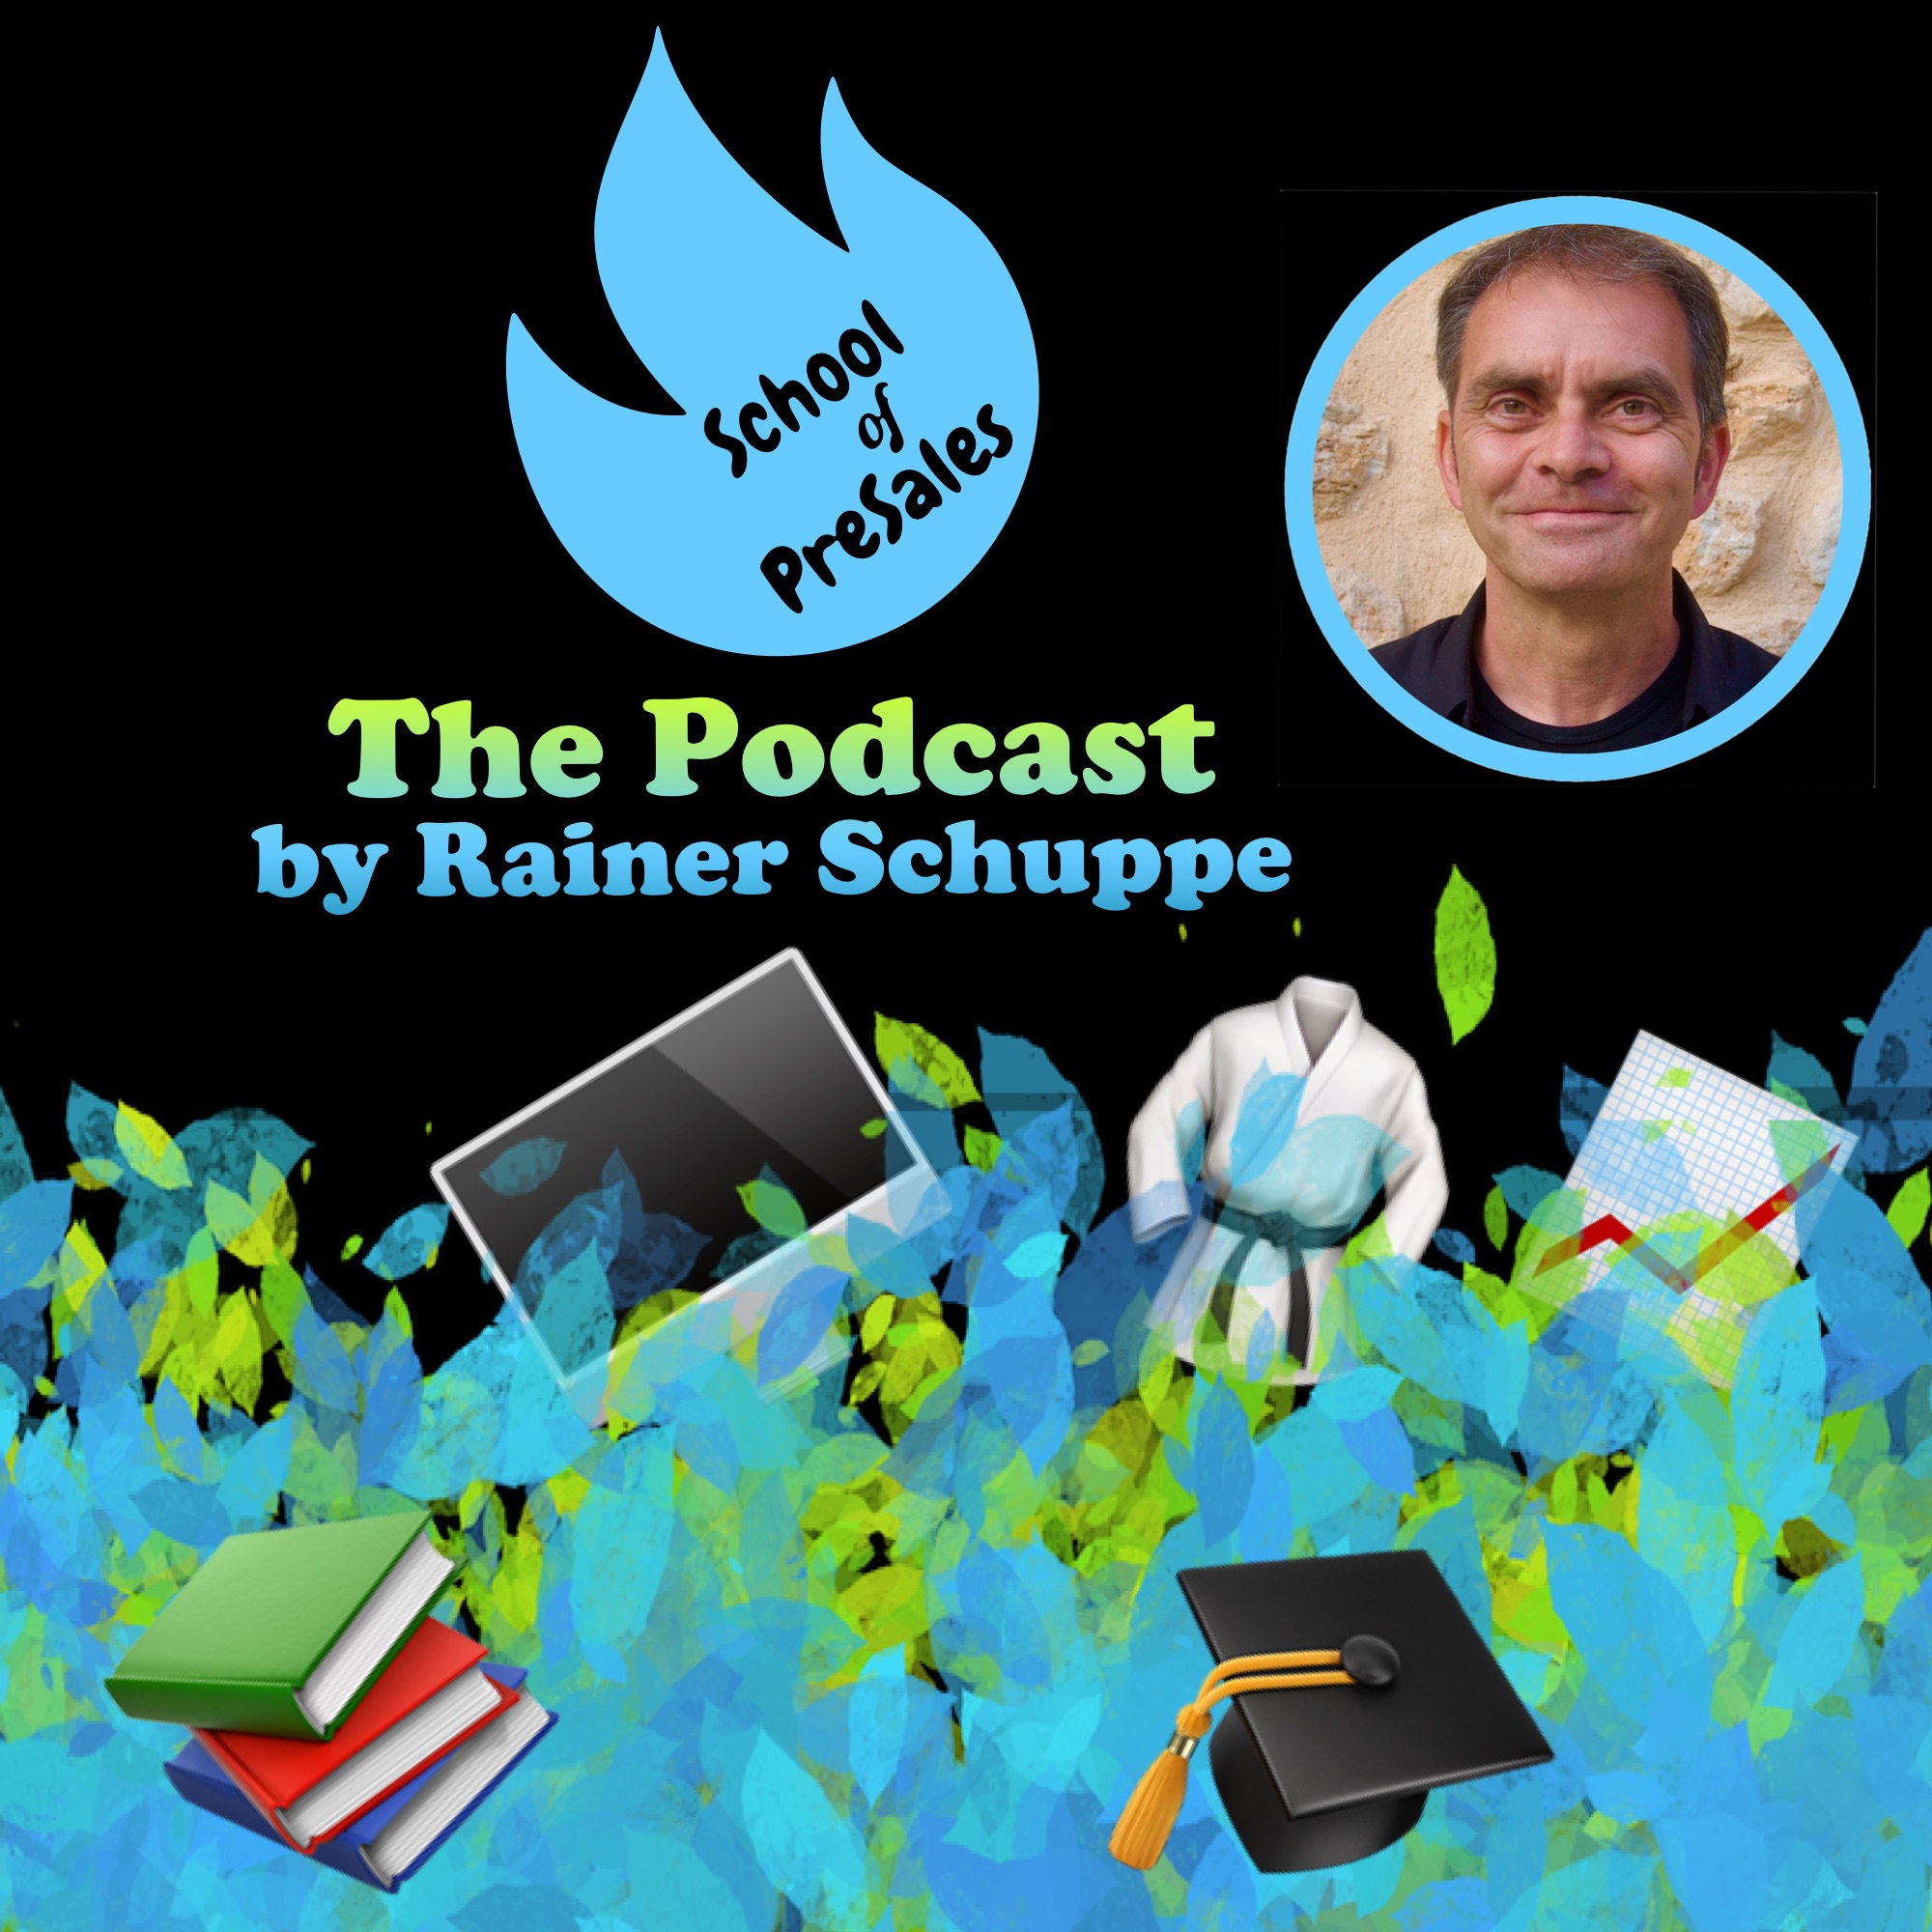 School of Presales – The Podcast by Rainer Schuppe